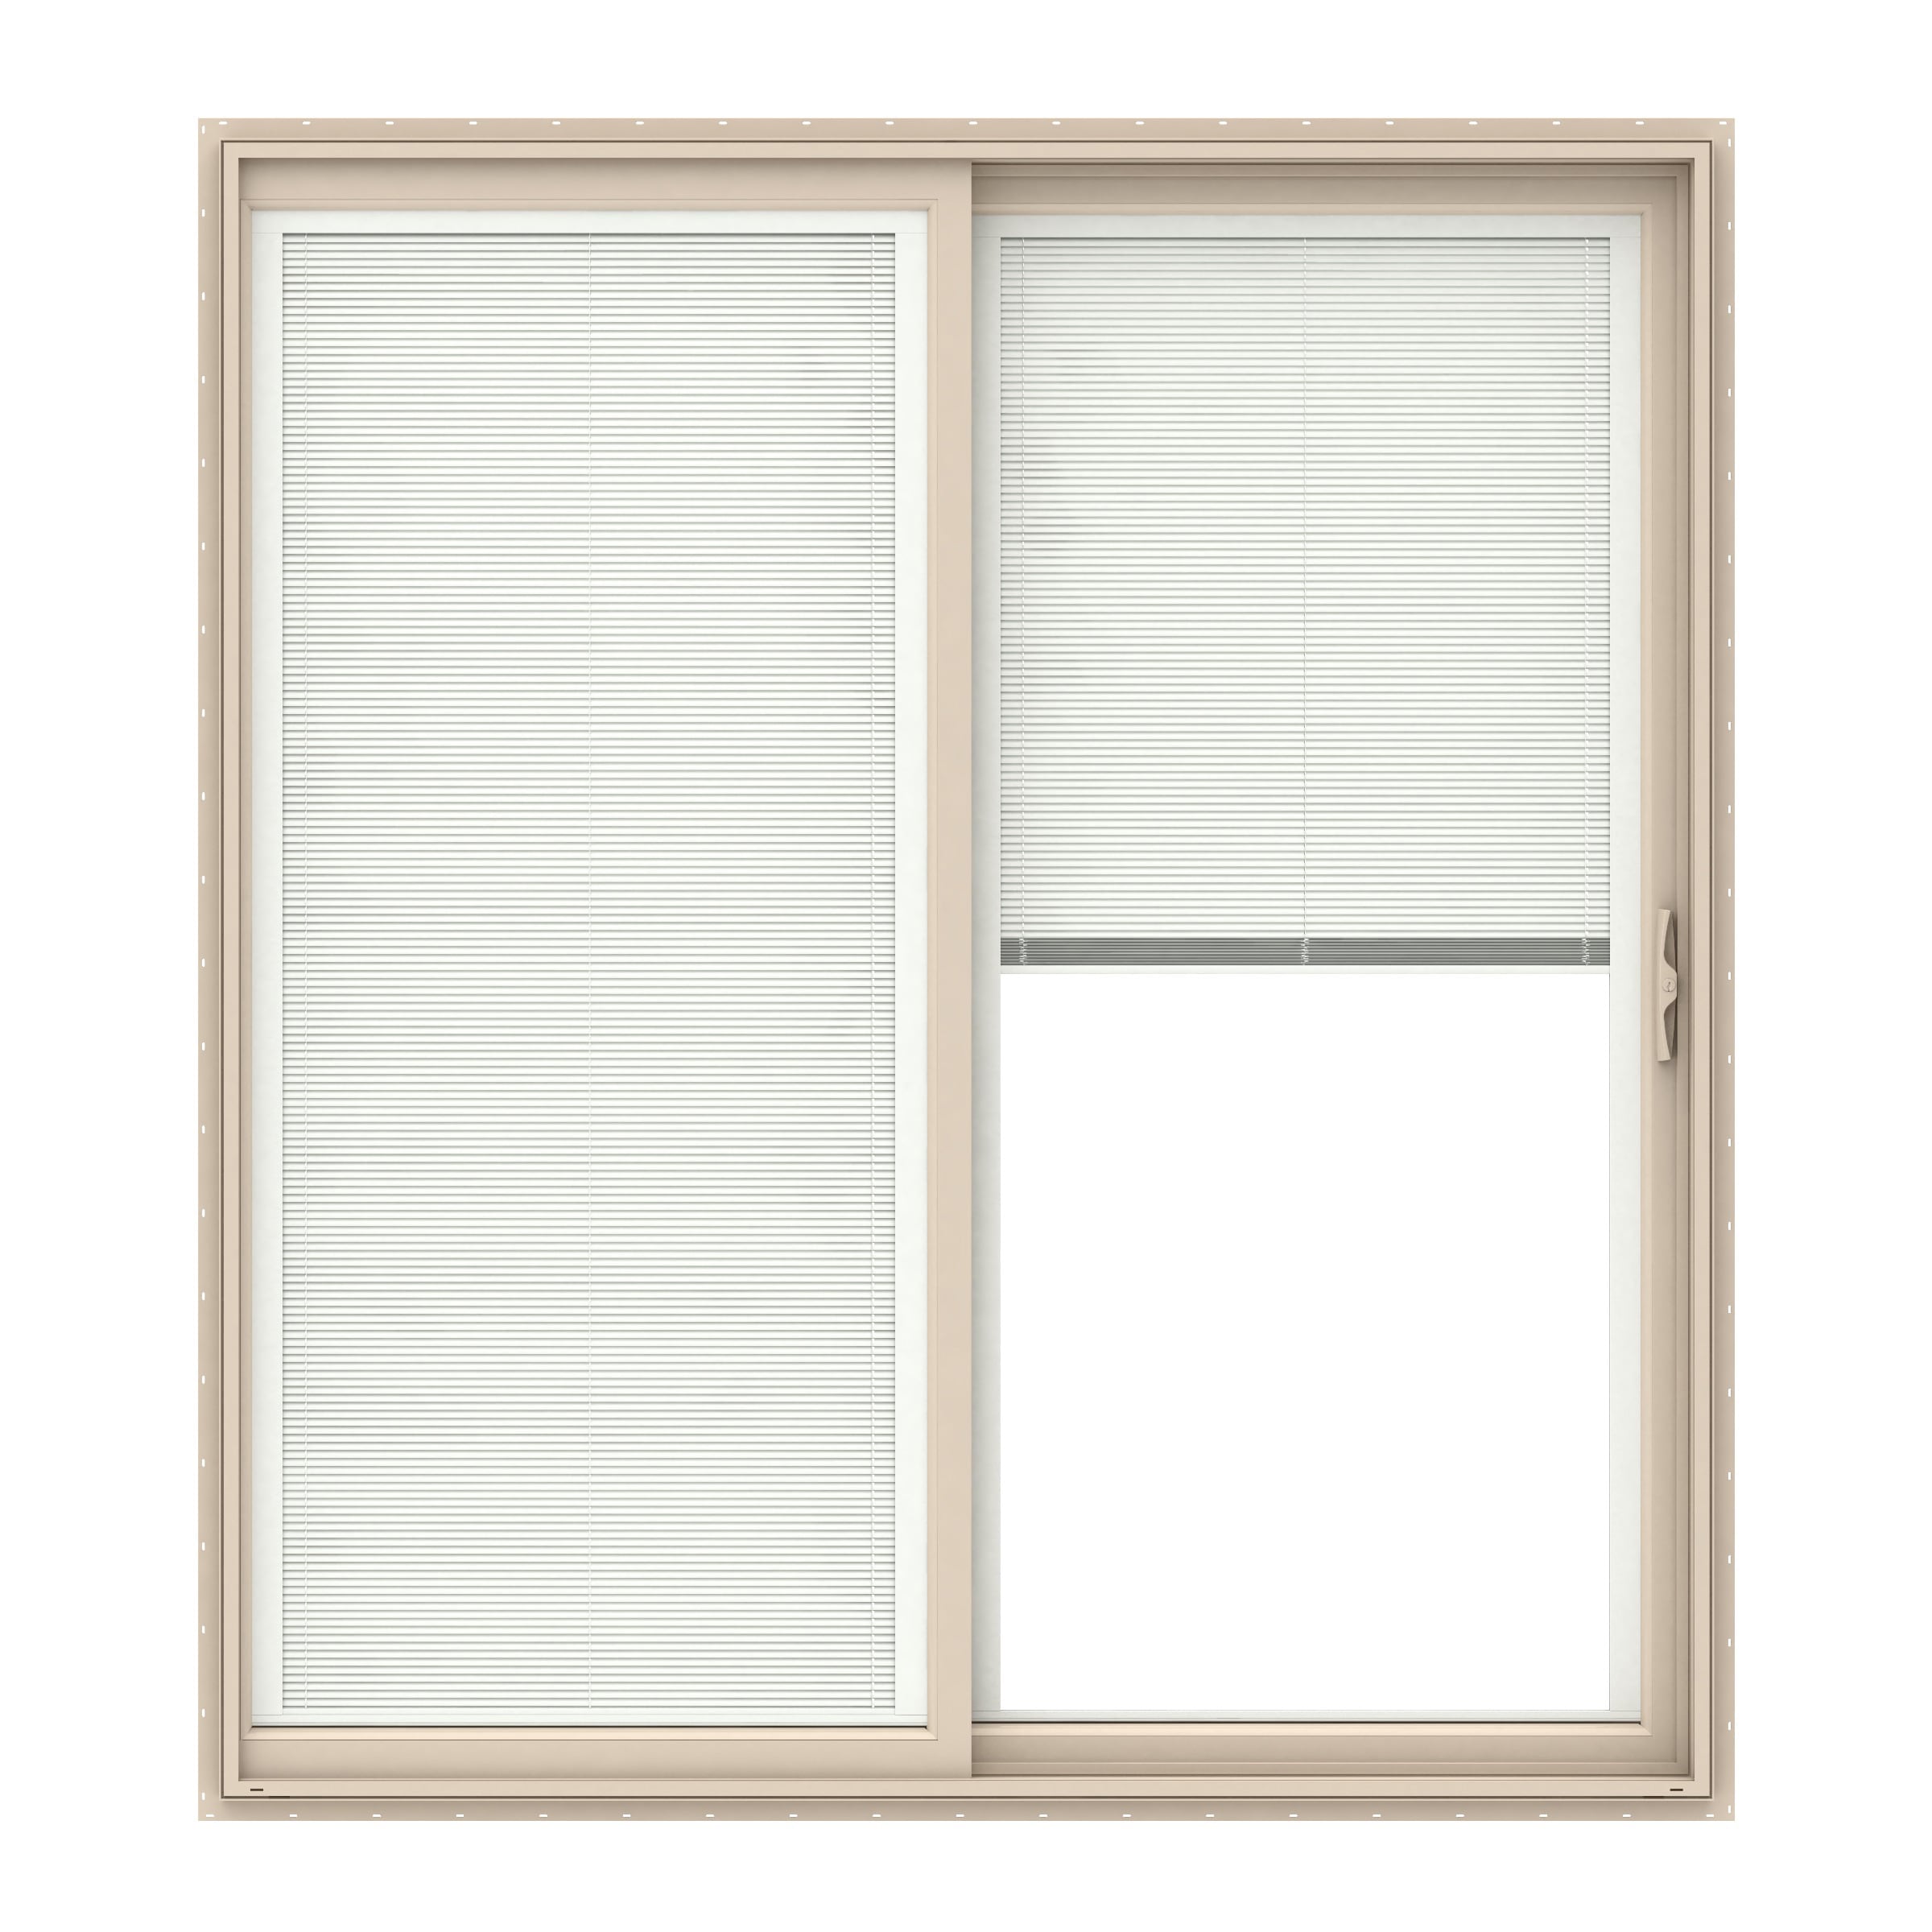 150 Series West 72-in x 80-in Low-e Blinds Between The Glass Almond Vinyl Sliding Right-Hand Sliding Double Patio Door in Brown/Tan | - Pella 1000011495